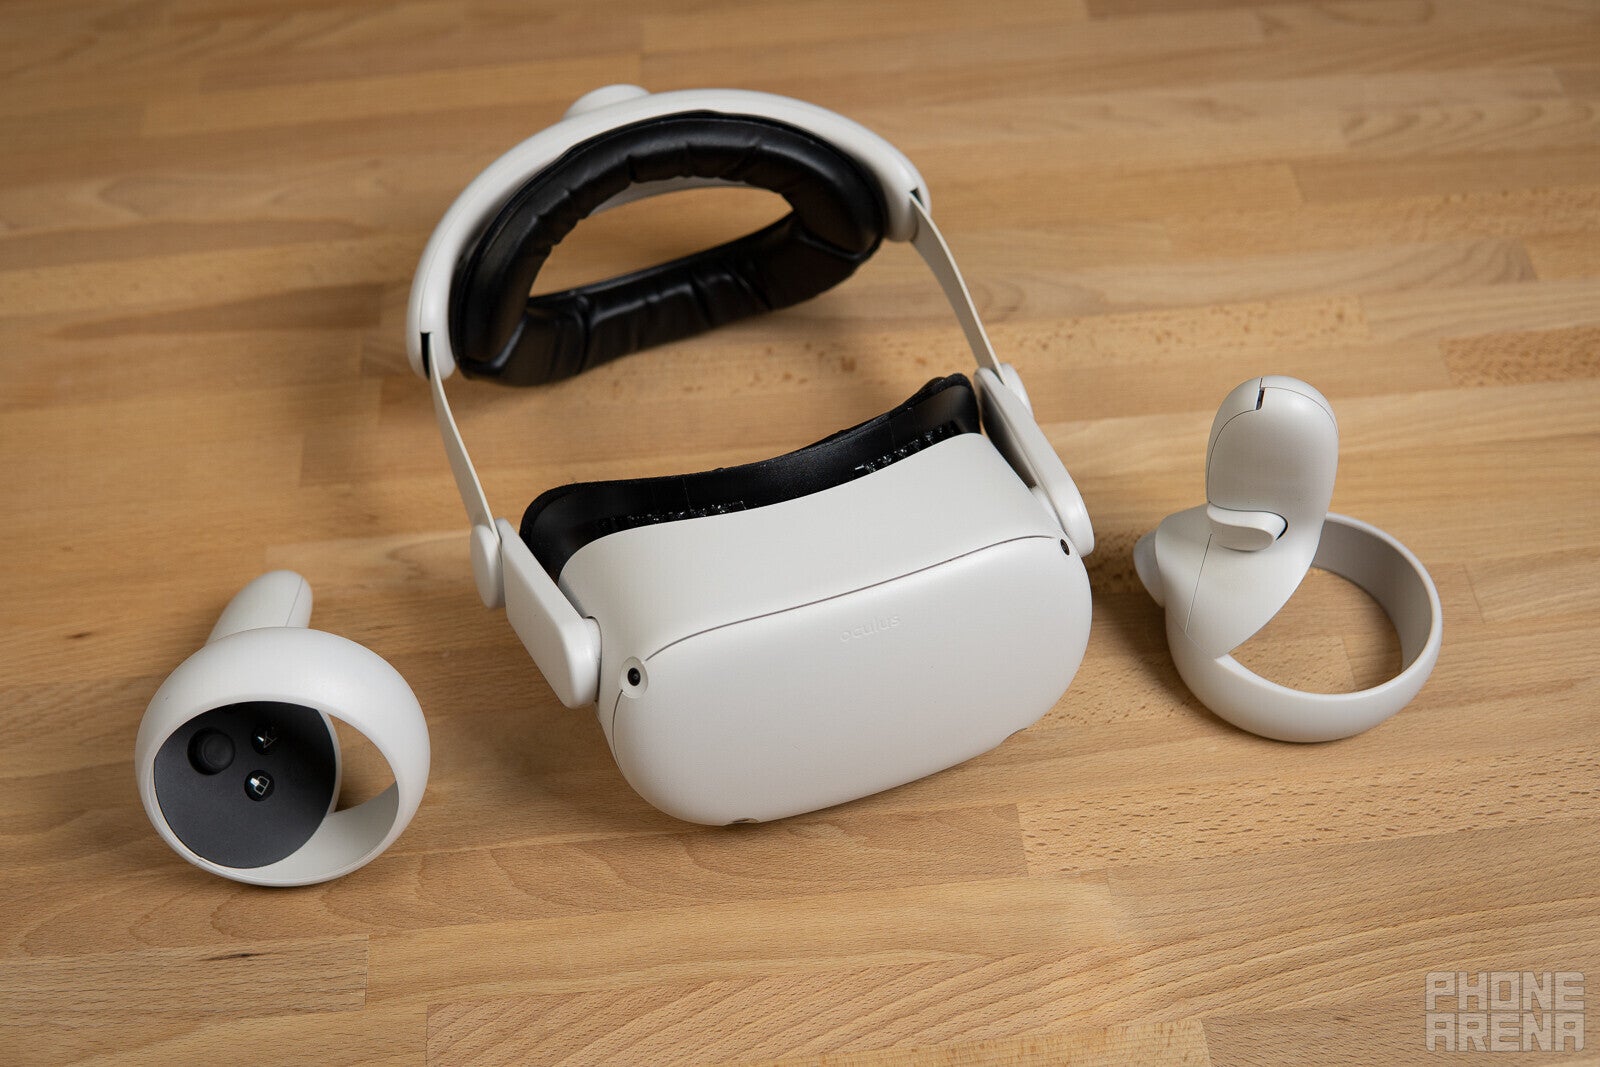 The Quest 2 is as simple as it gets – just a headset and two controllers (and you can even drop those, as it has optional hand tracking support too) - Opinion: The Quest 2 made all current VR headsets obsolete! Apple, Valve, HTC all follow the king; great news for us!